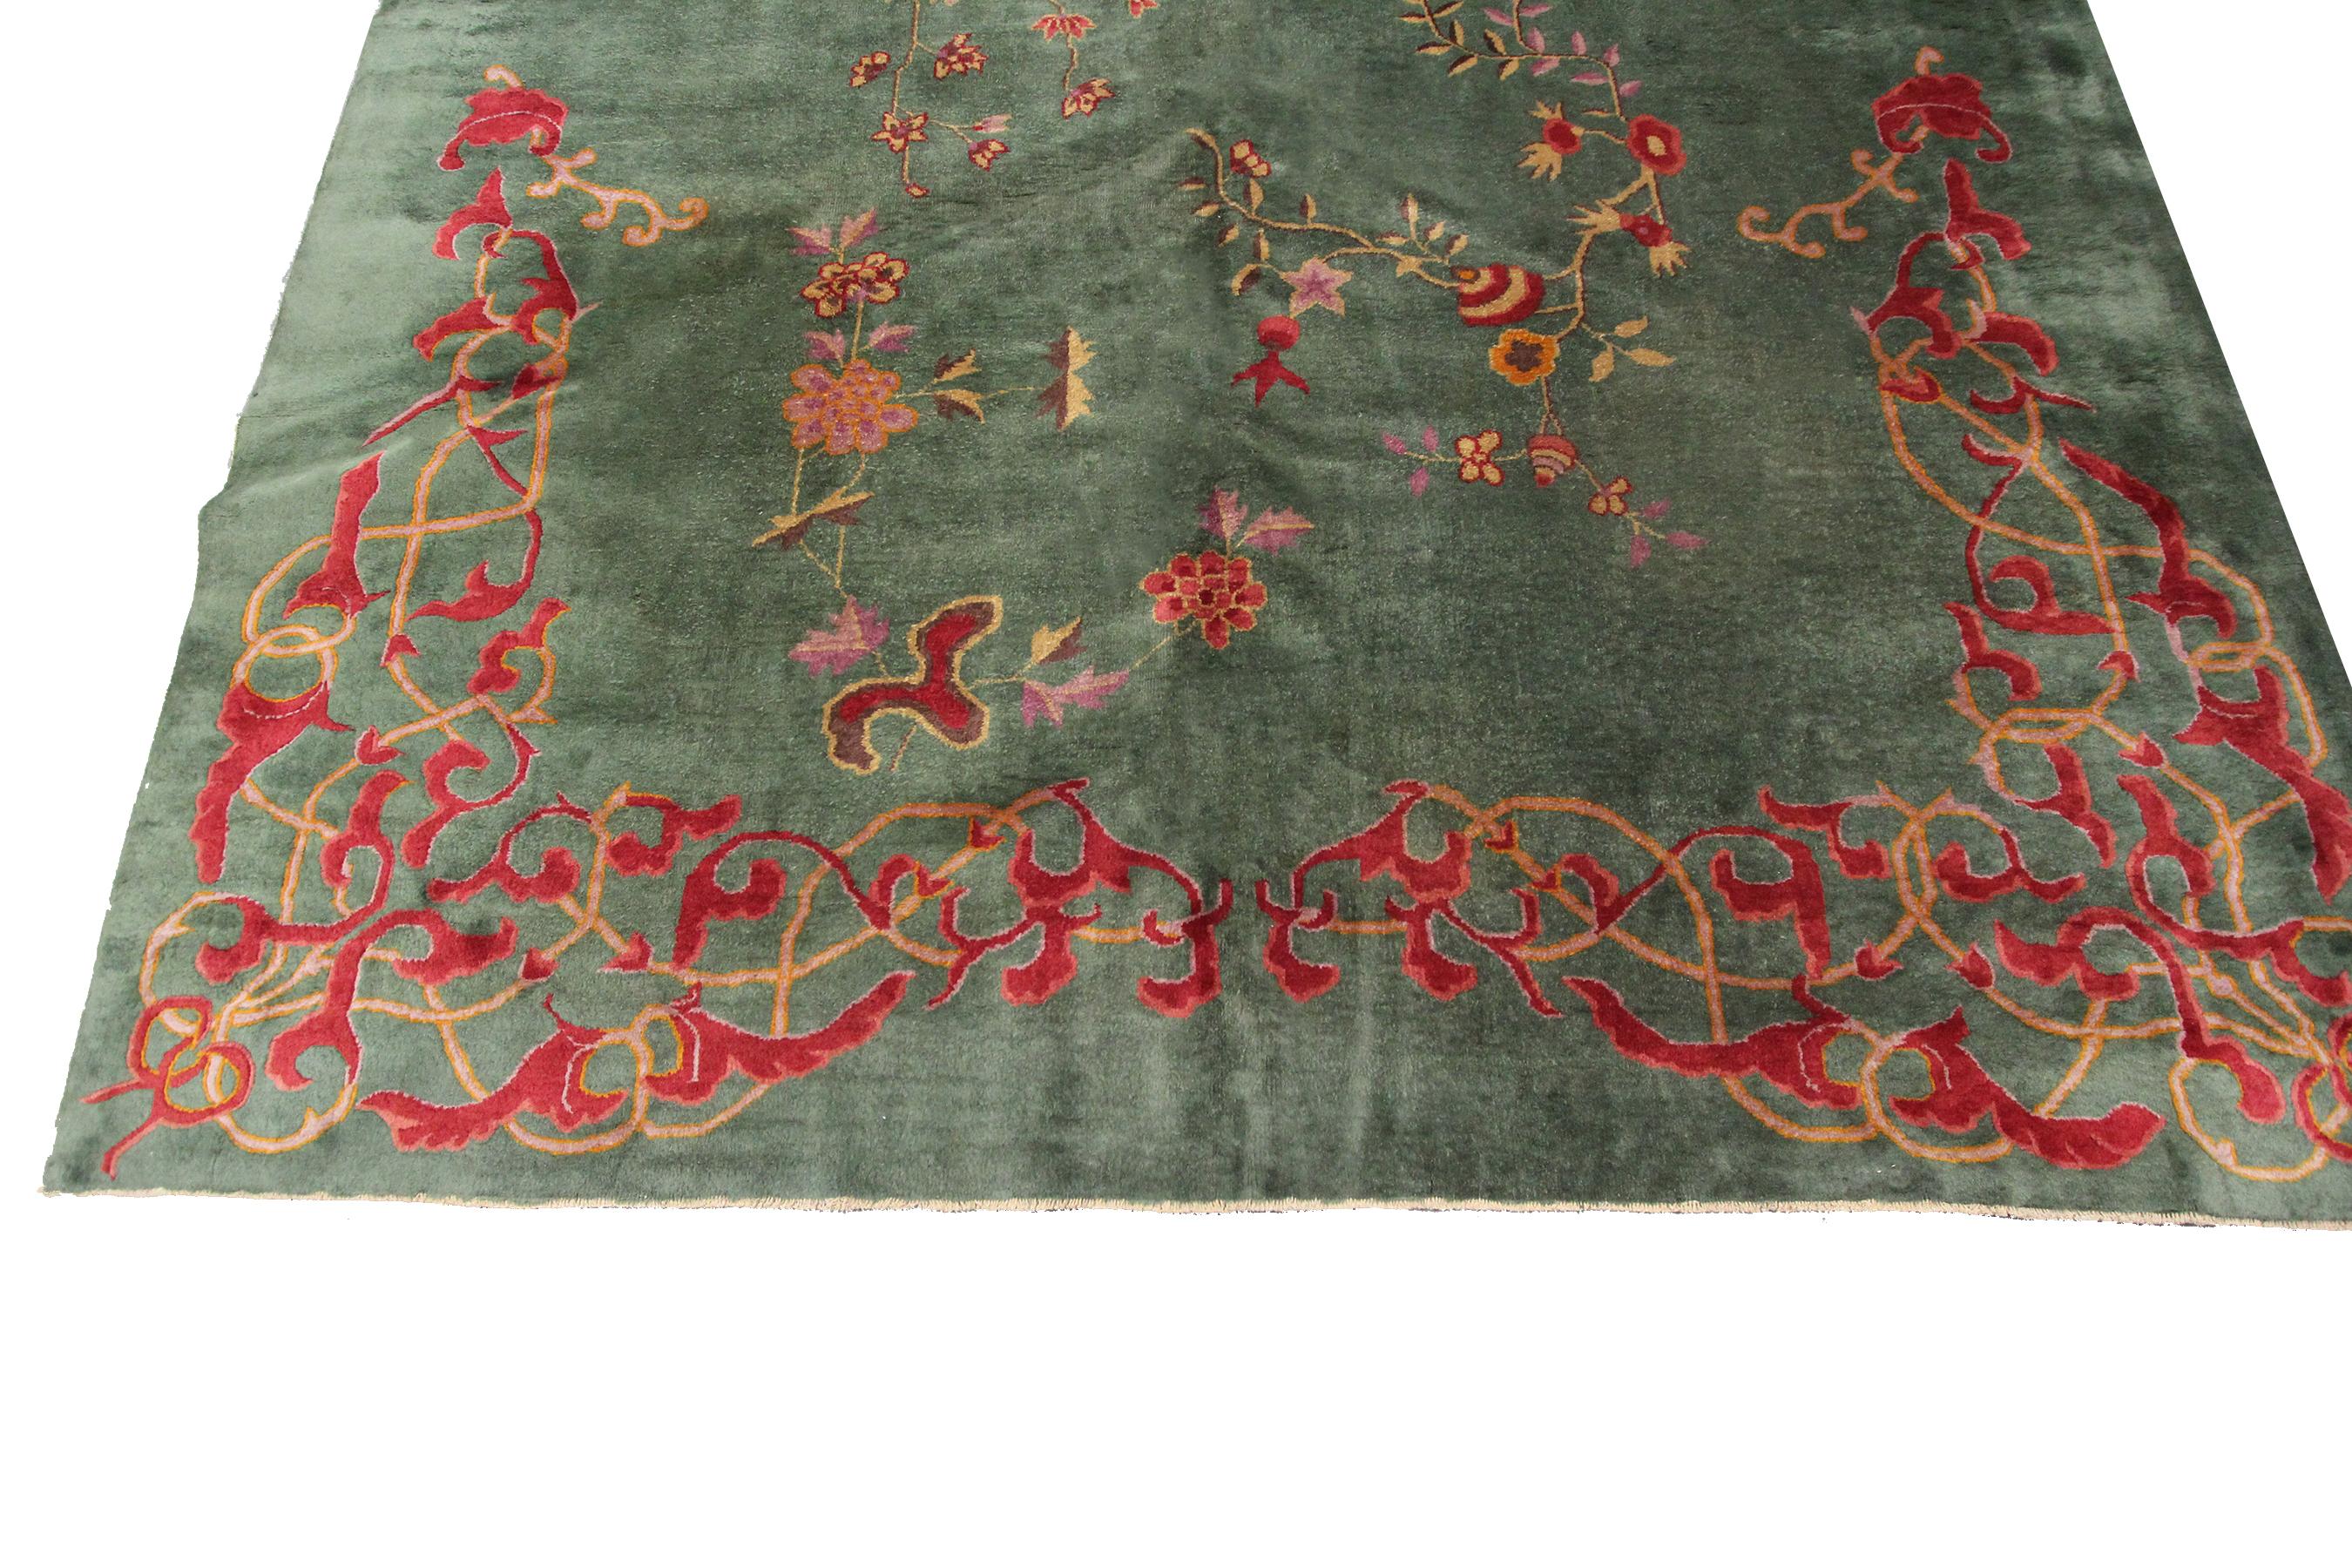 Antique Art Deco Chinese Rug Antique Chinese Rug Antique Art Deco Rug Green 2